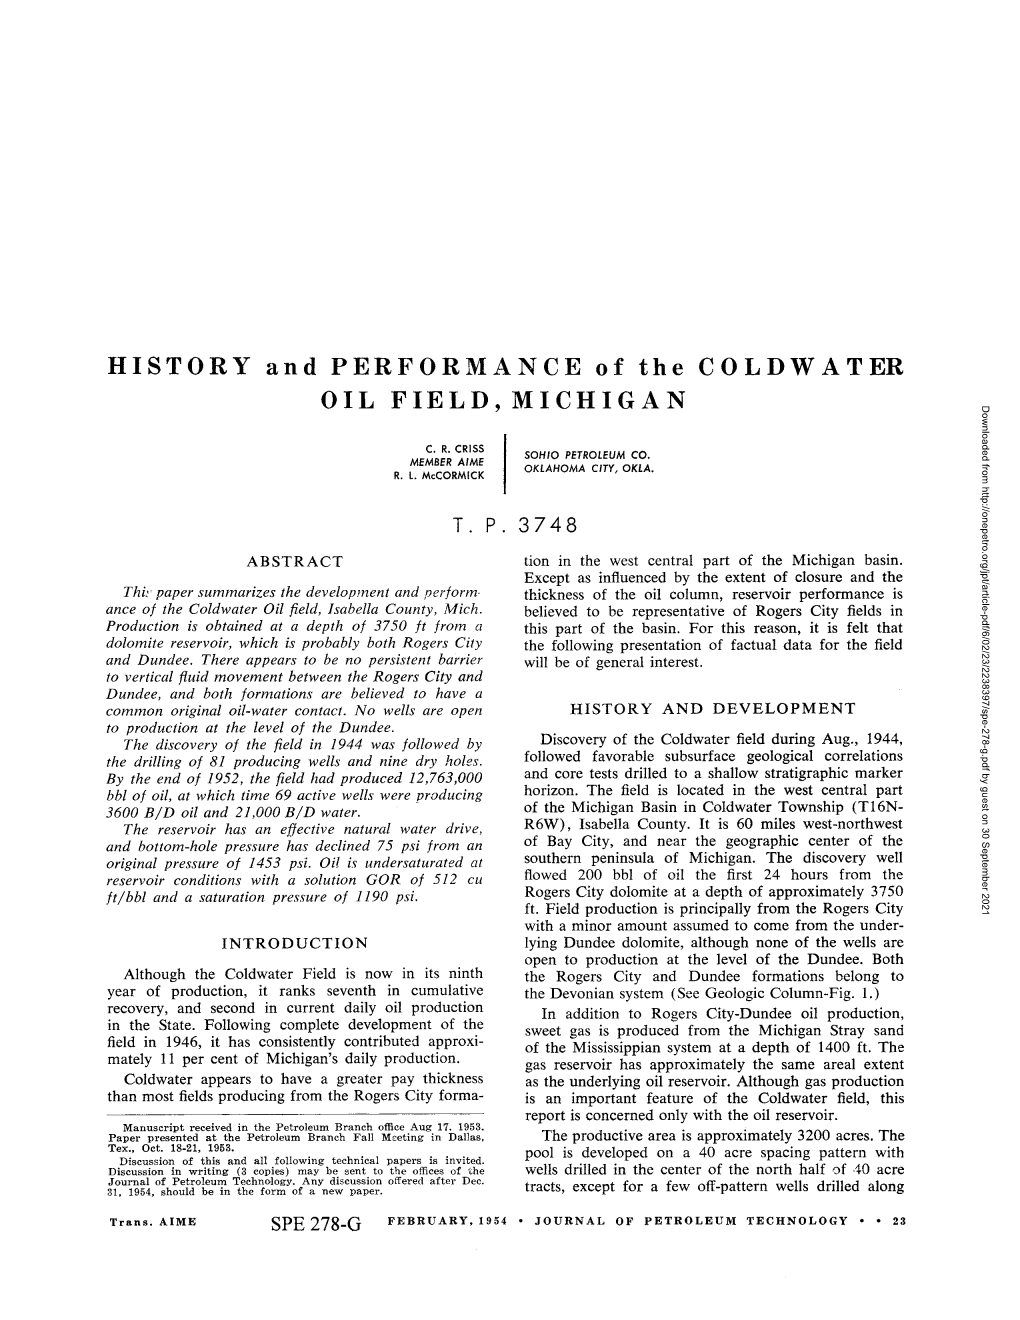 History and Performance of the Coldwater Oil Field, Michigan